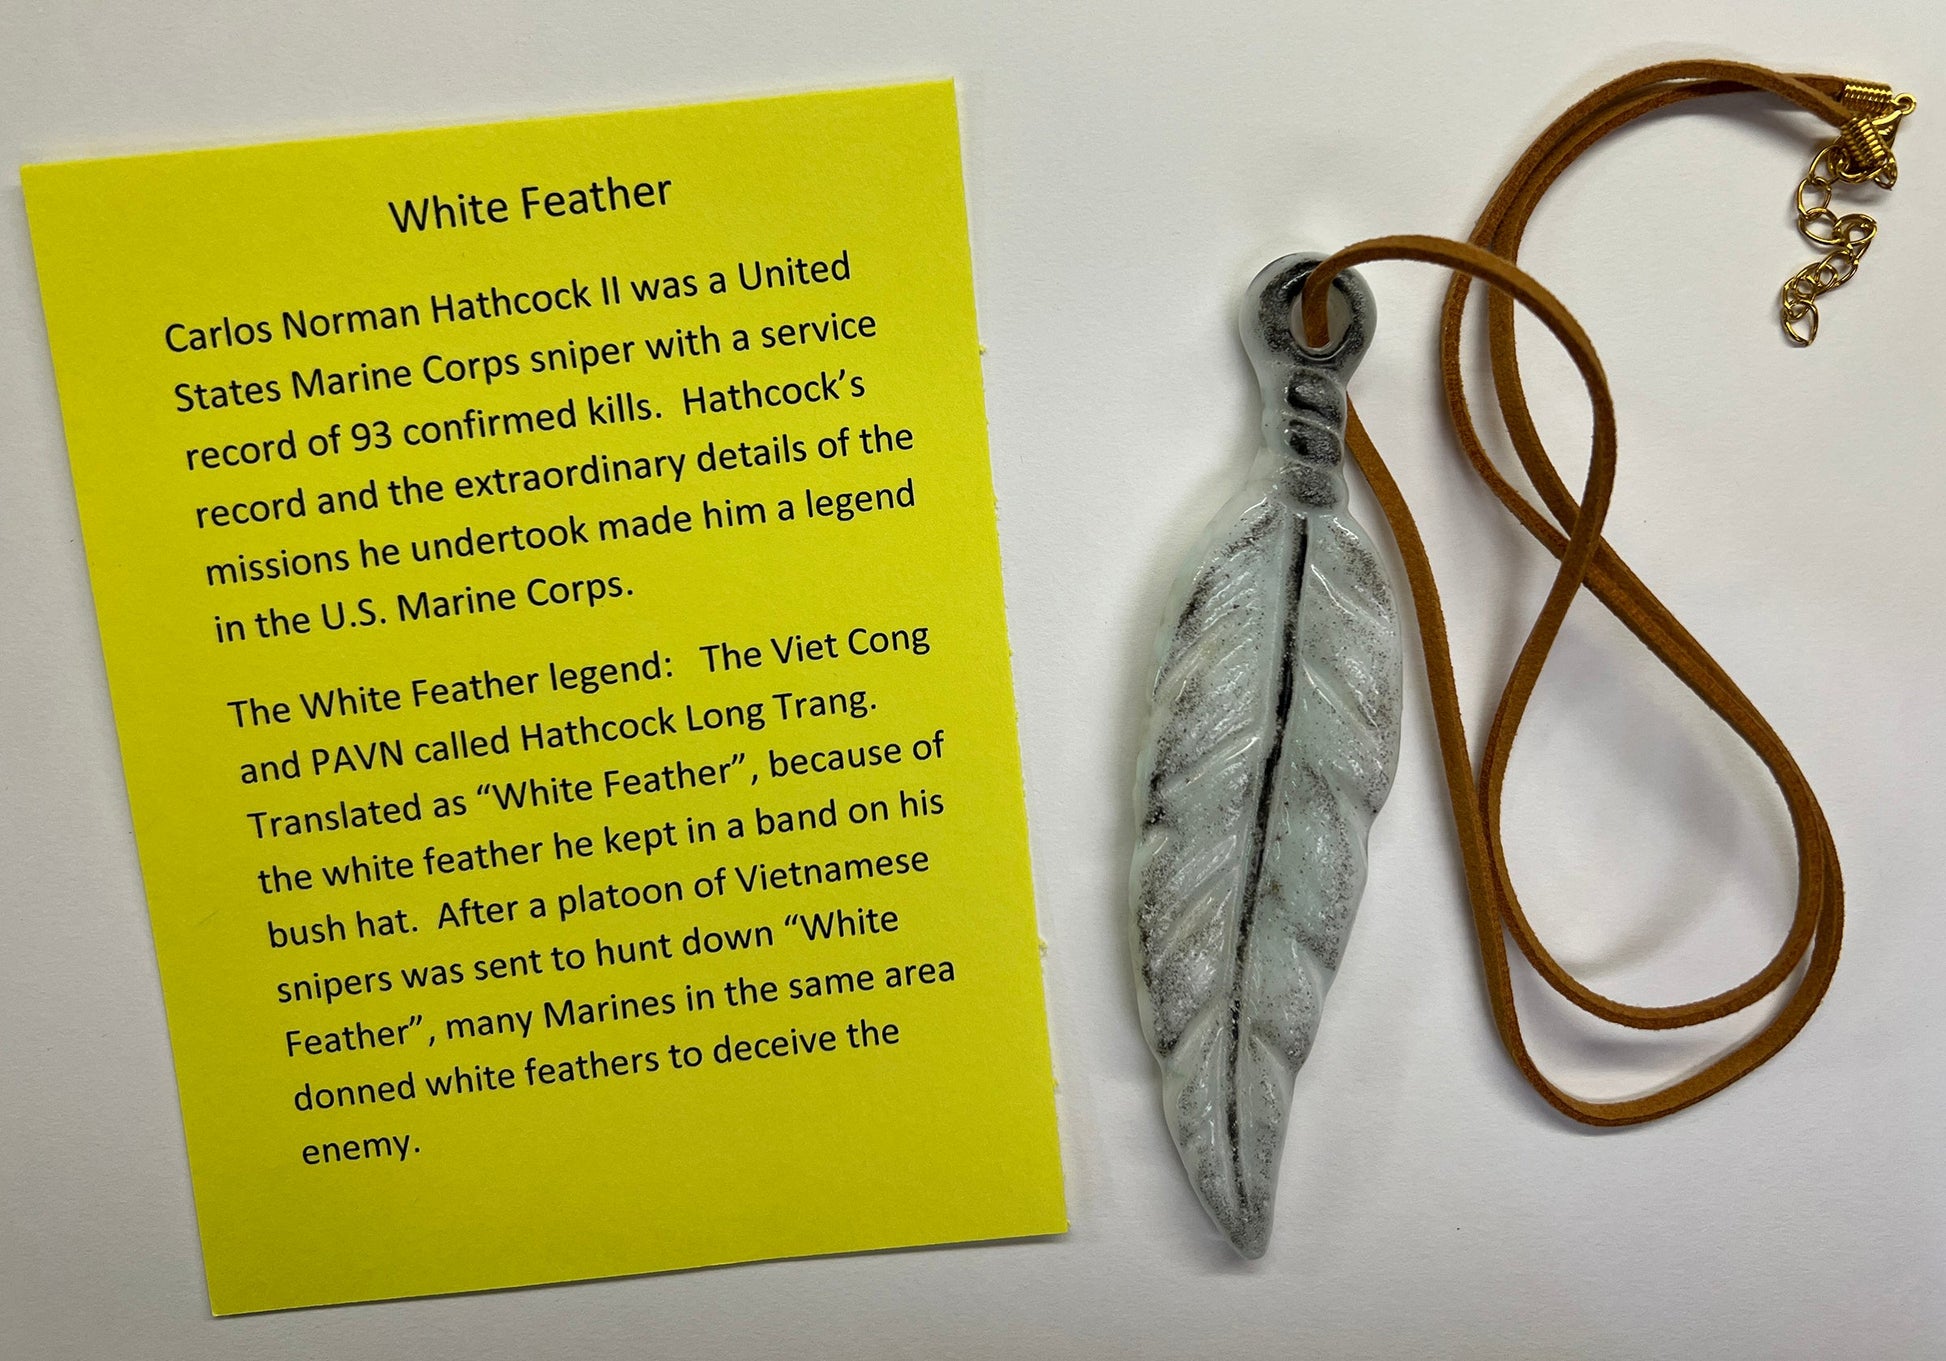 White Feather, Fused Glass, Amulet, tribute, Vietnam Veterans, white glass, 1" X 4" amulet, kiln fired, legend, White Feather, symbol, meaningful, Veterans, Marines, 24" leather cord, 